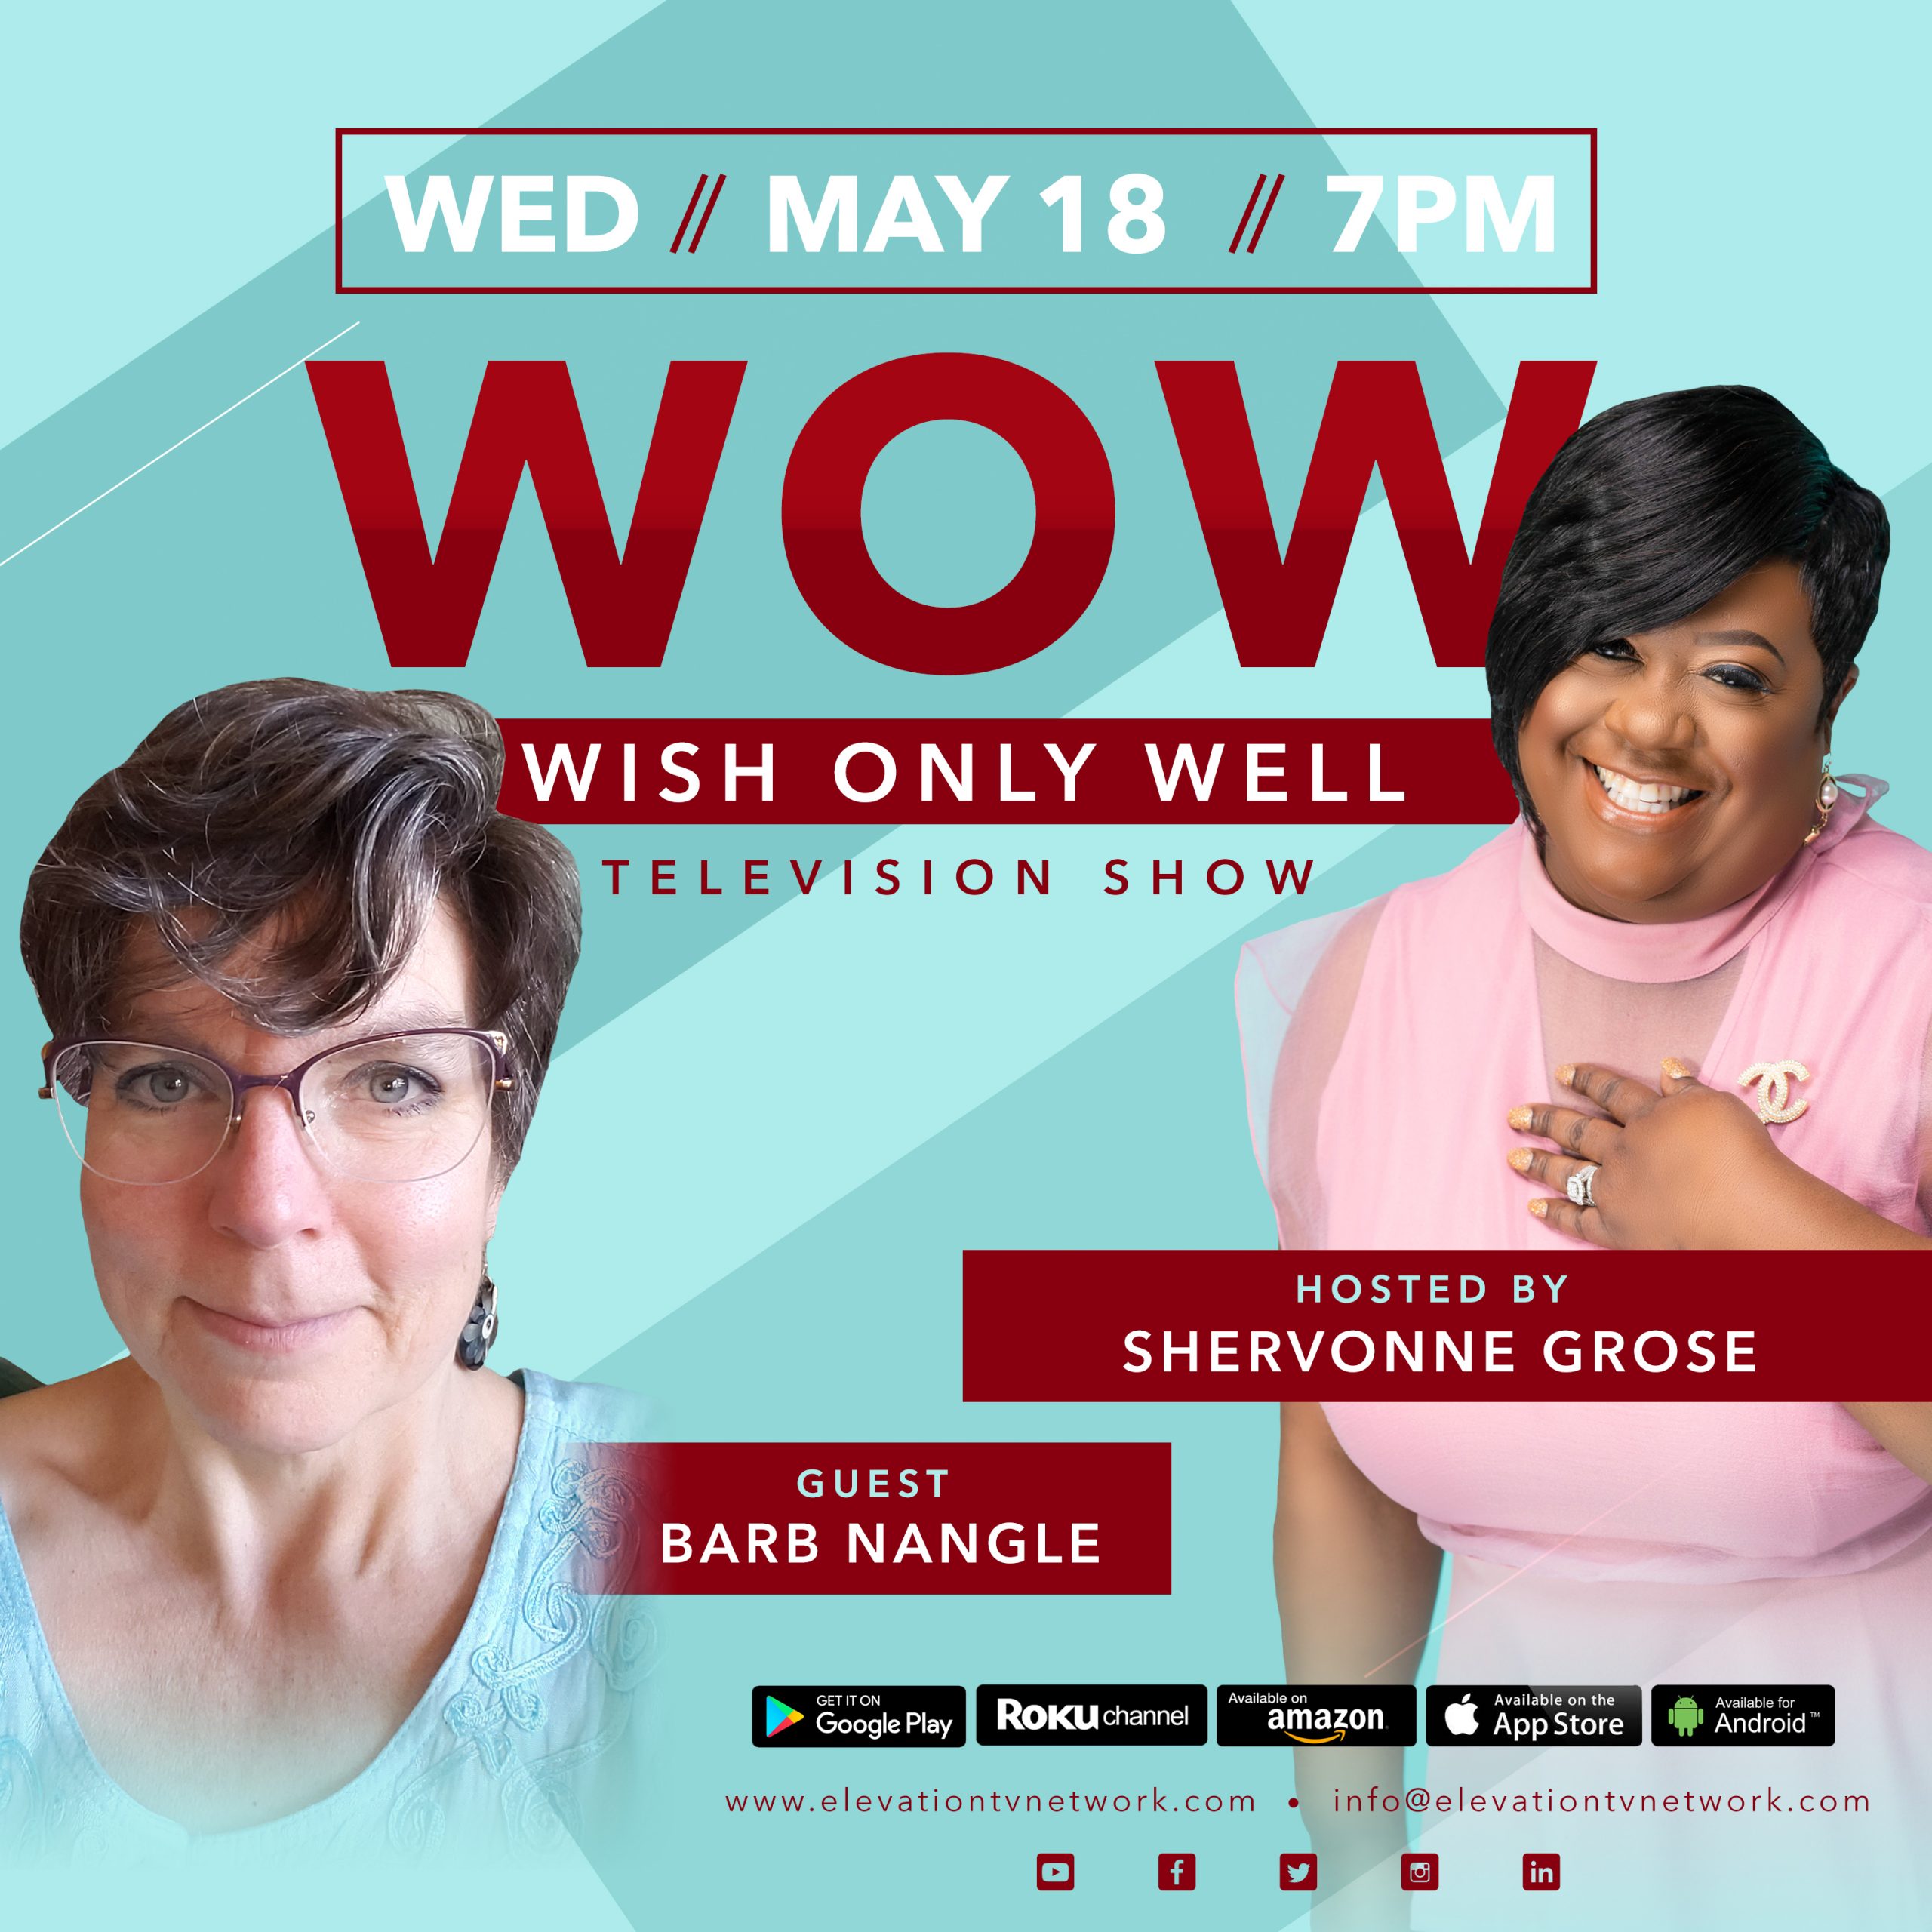 WOW_TV_Show_May18_BarbNagle